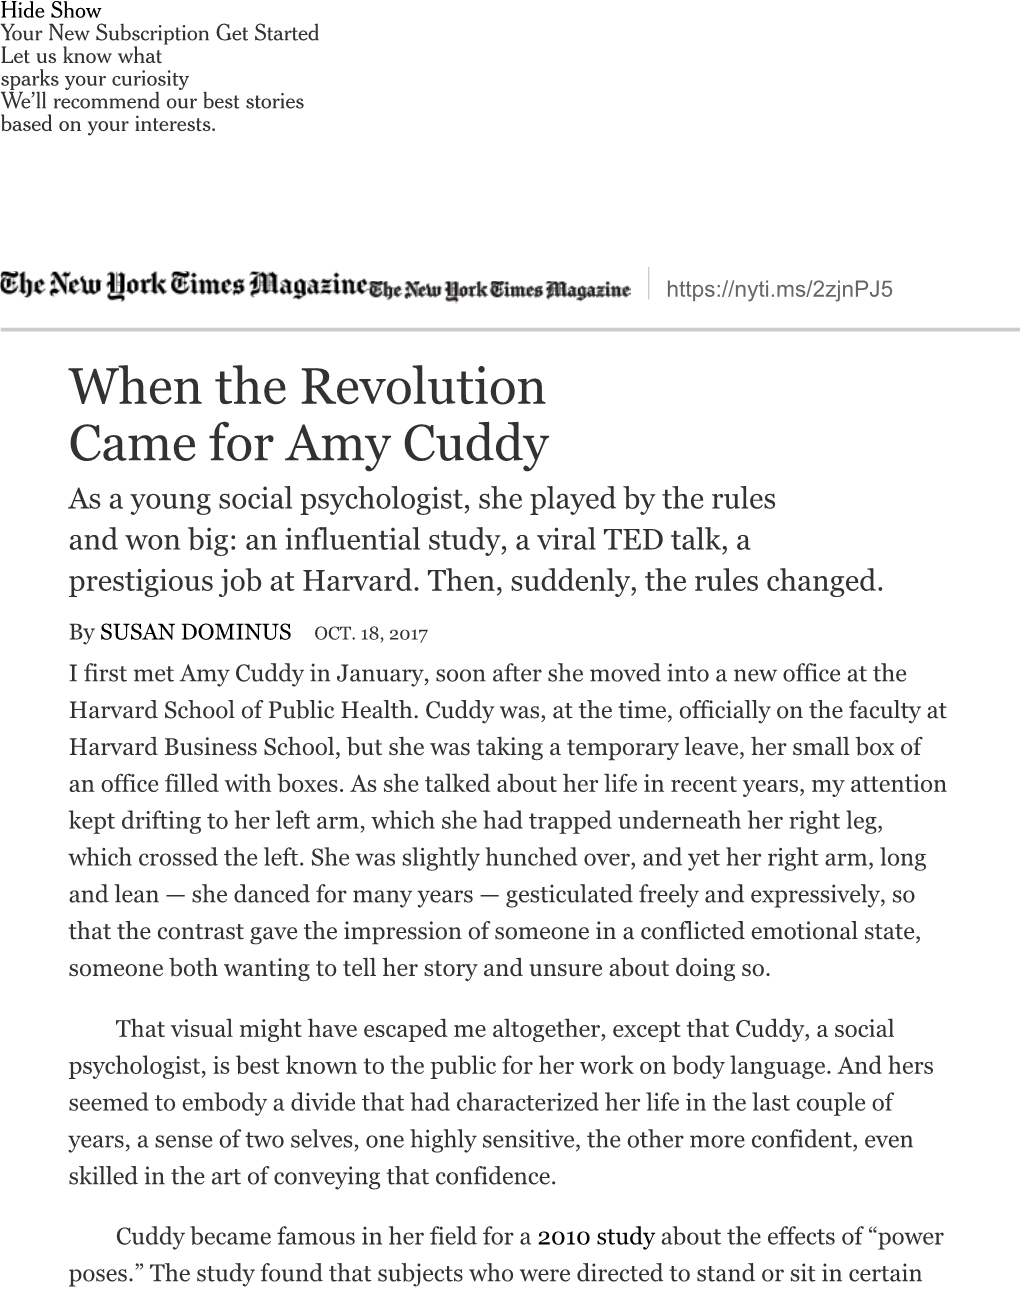 When the Revolution Came for Amy Cuddy